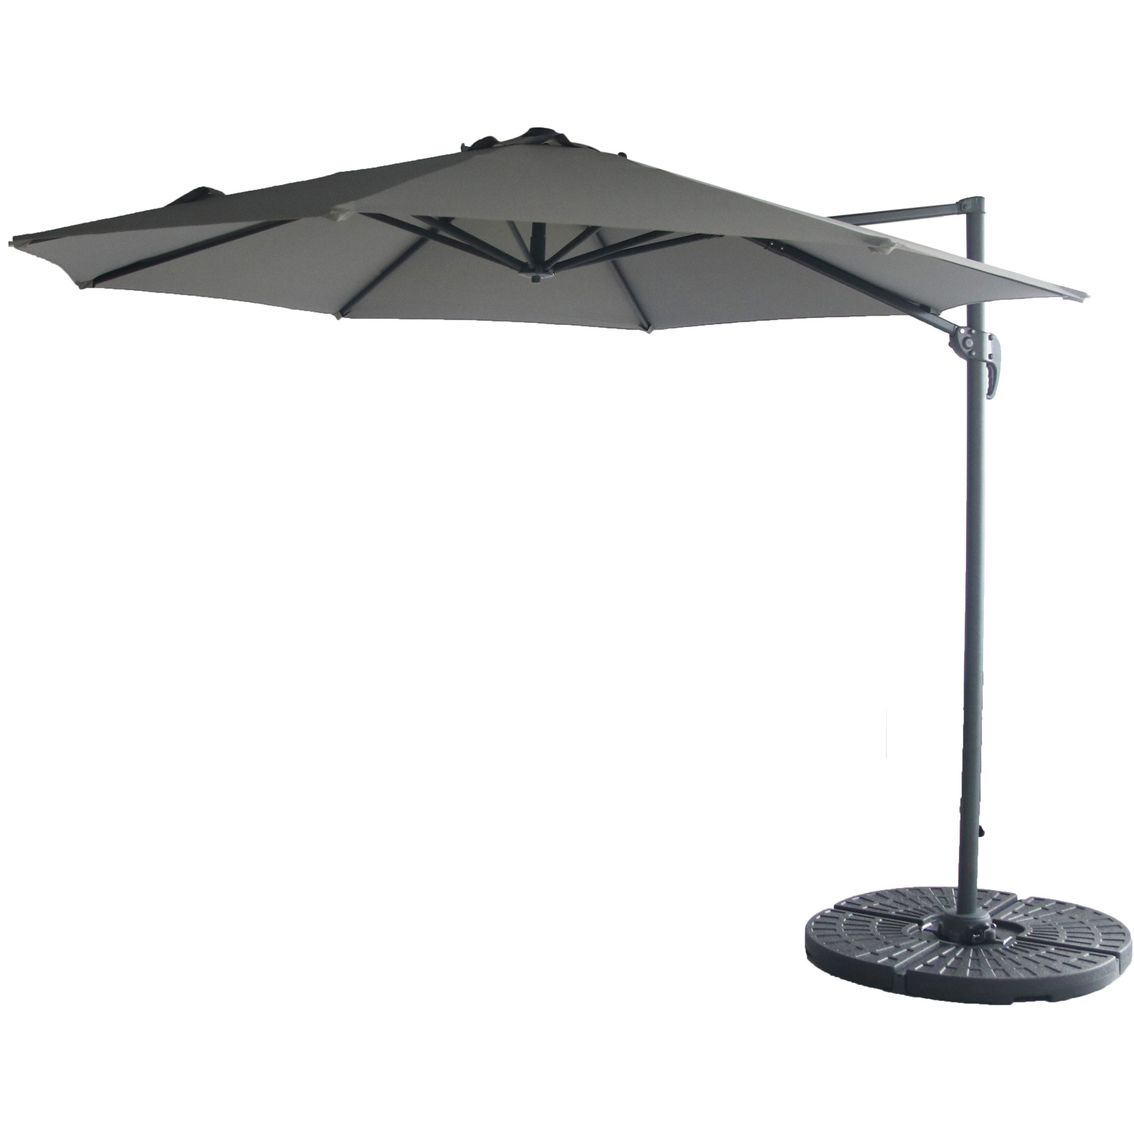 CasualWay Roman Offset Cantilever Umbrella - Image 2 of 3